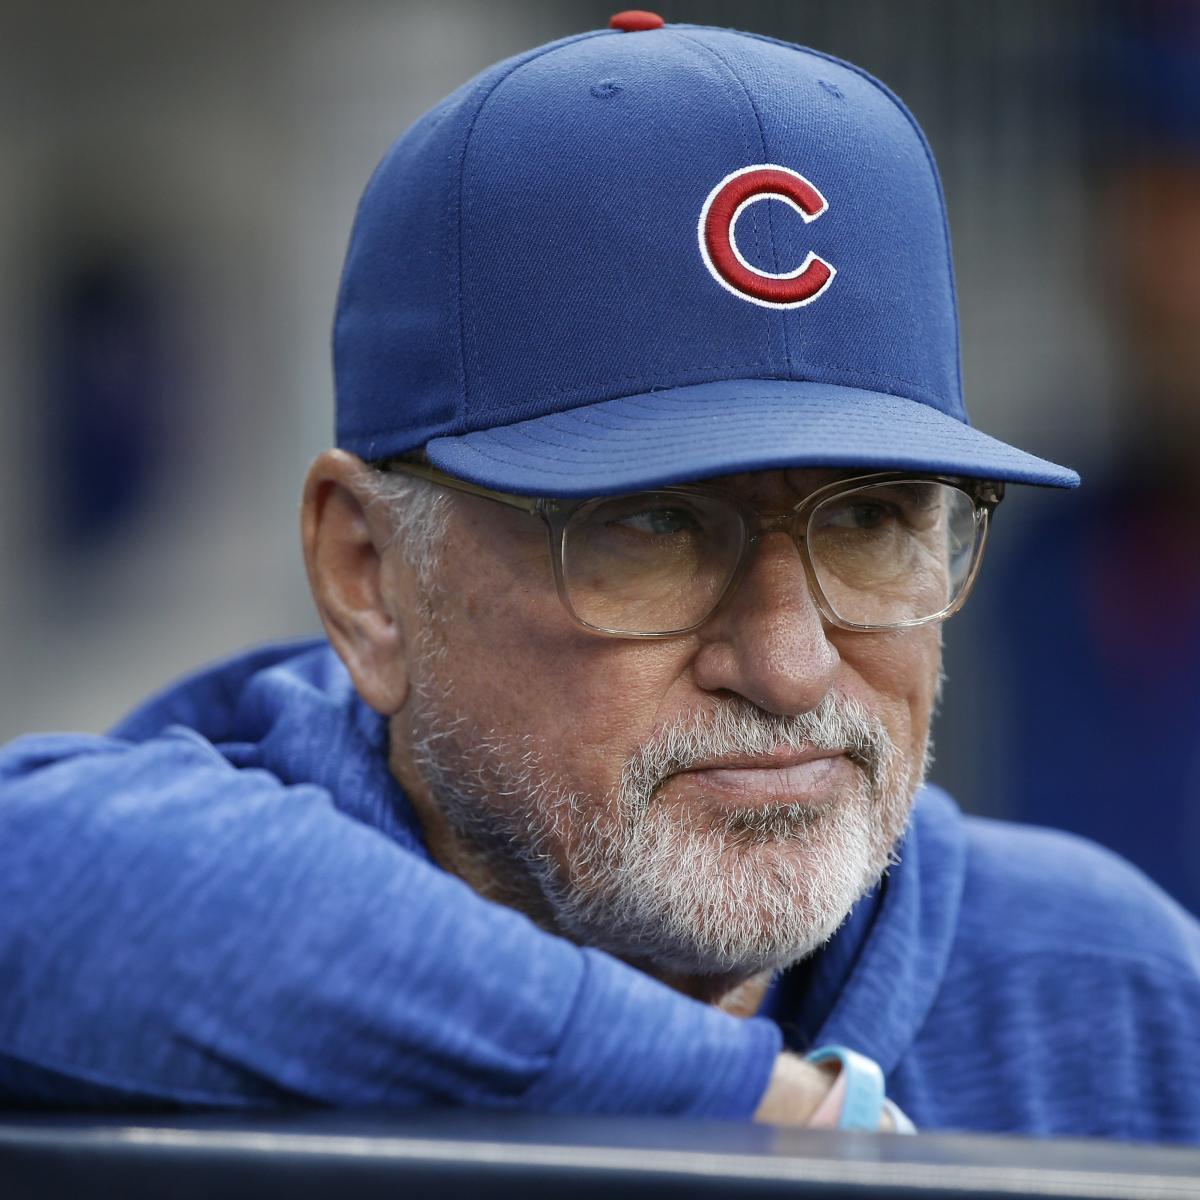 Cubs introduce Joe Maddon as 54th manager in franchise history